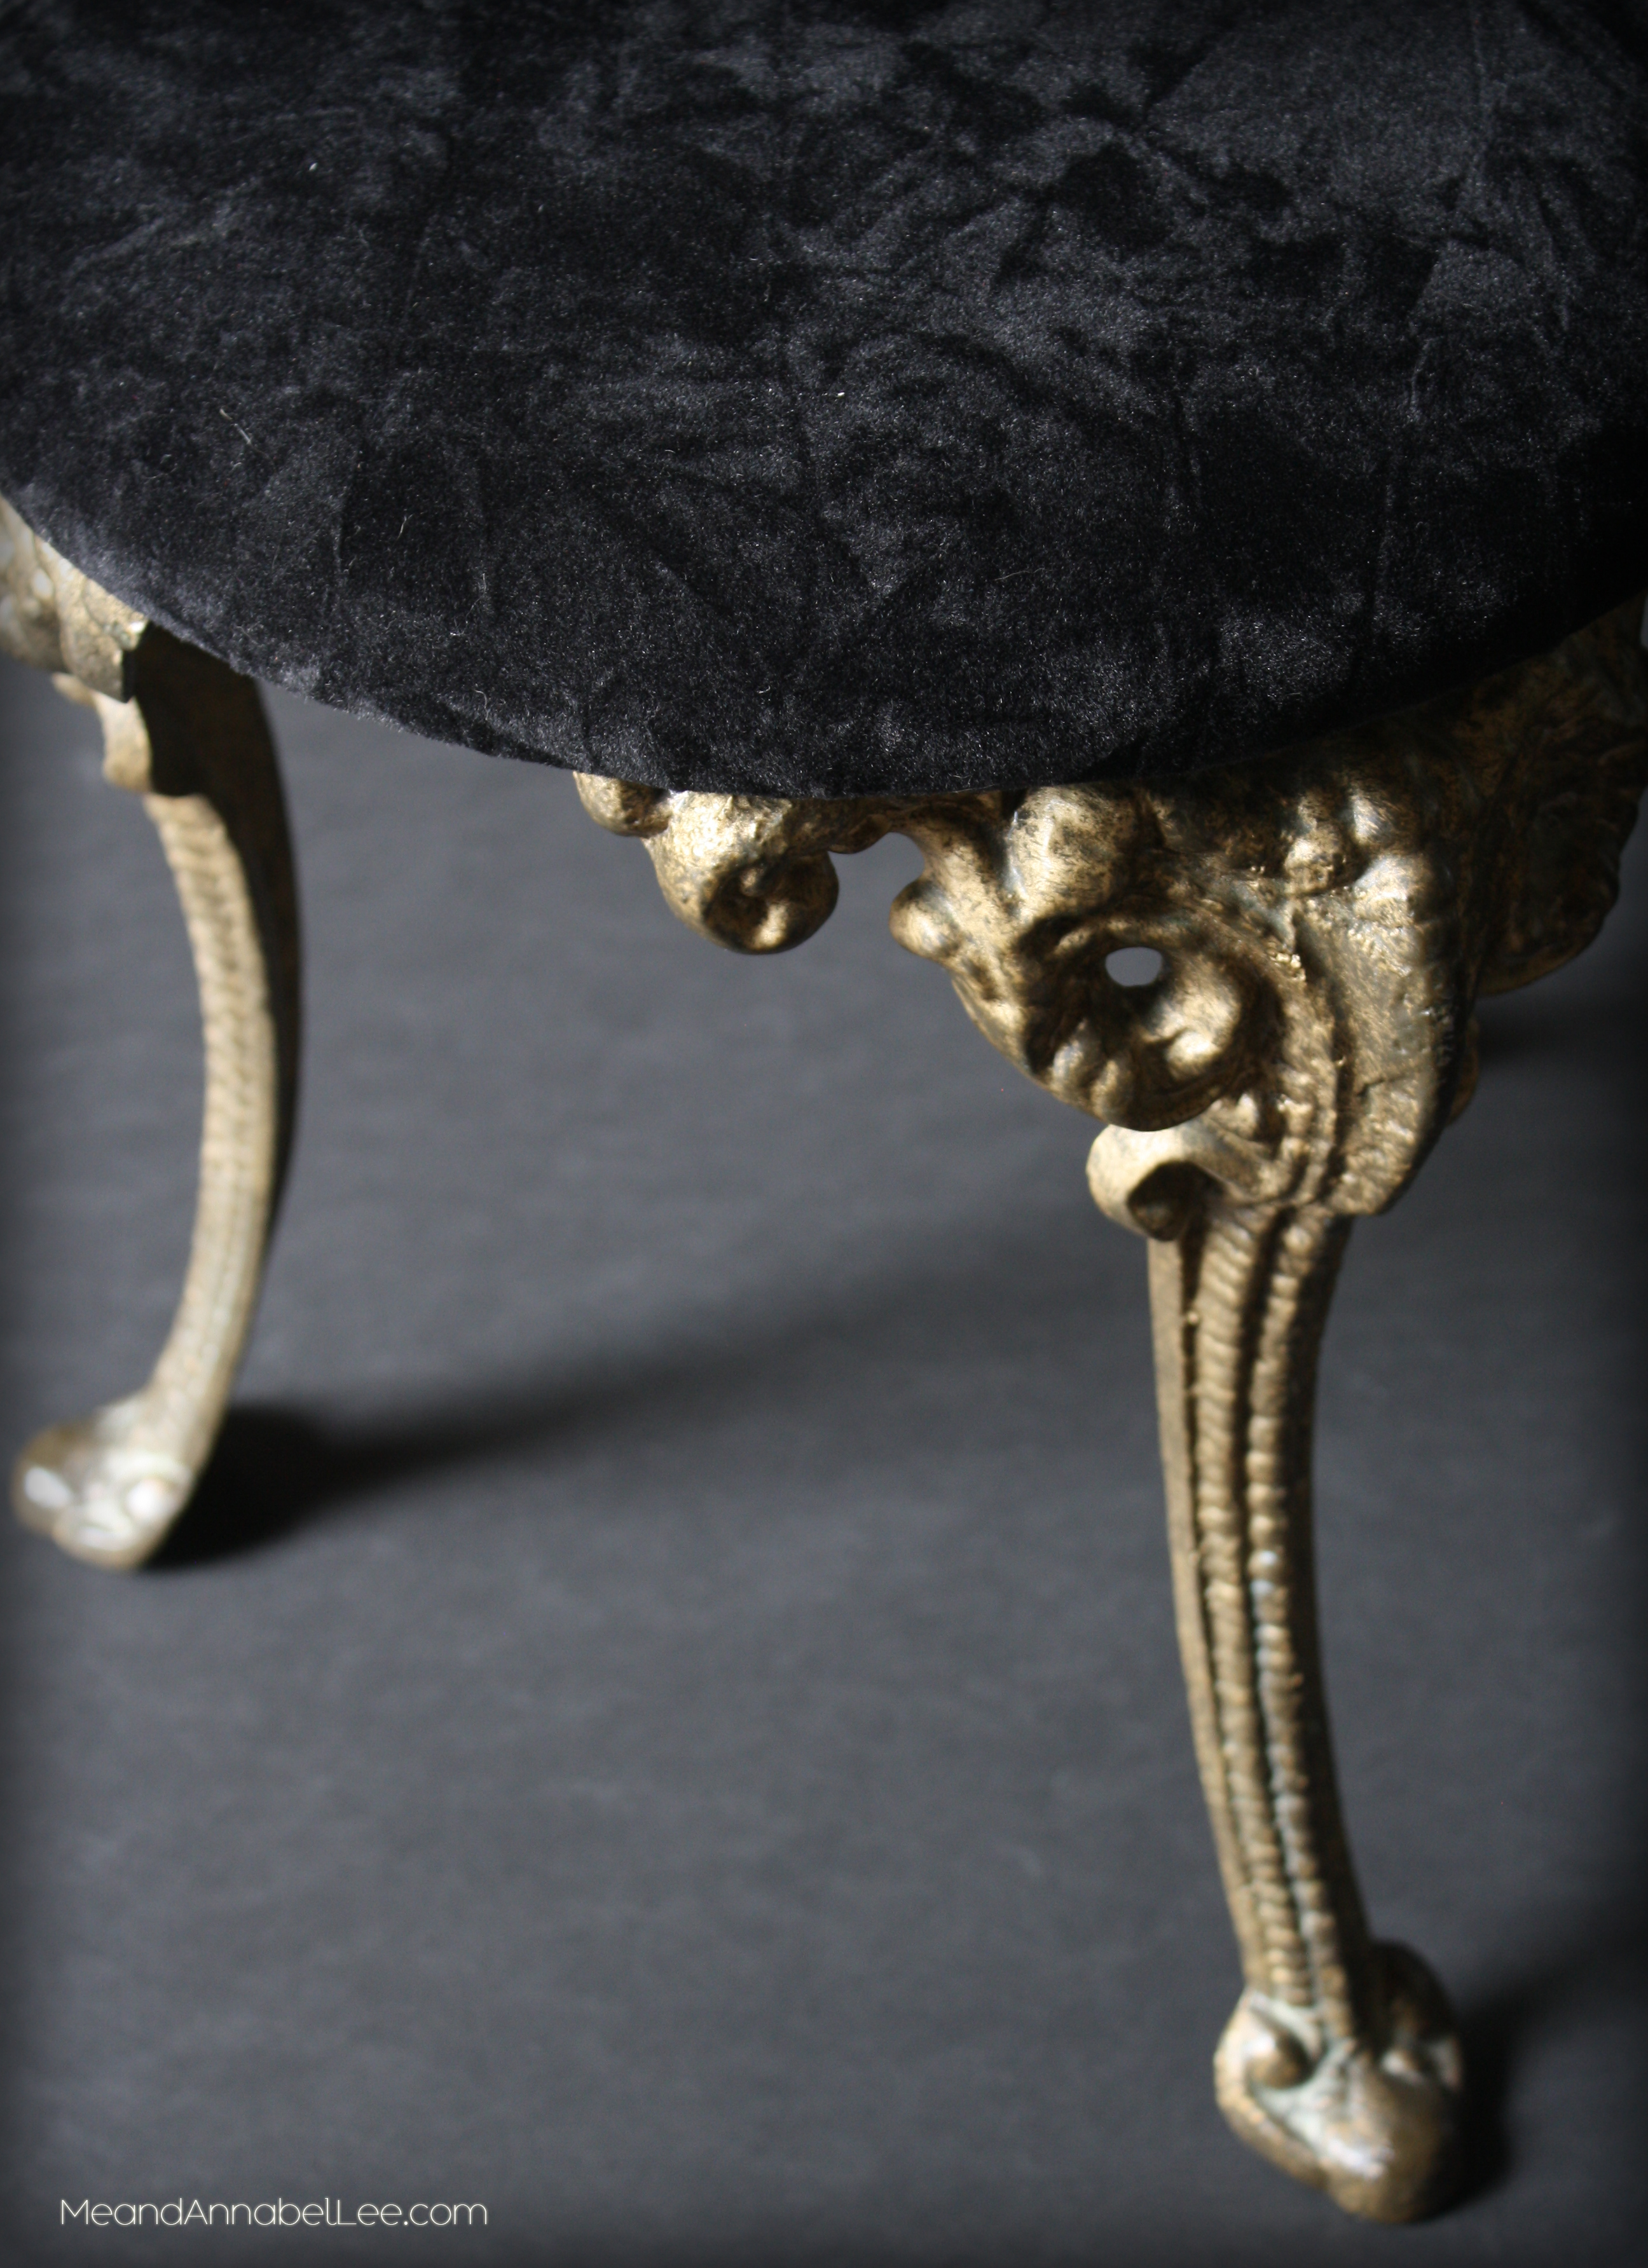 Fabulous DIY Black Crushed Velvet Upholstered Gothic Piano Stool - Goth It Yourself - Gothic Home Decor - Trash to Treasure Project - www.MeandAnnabelLee.com